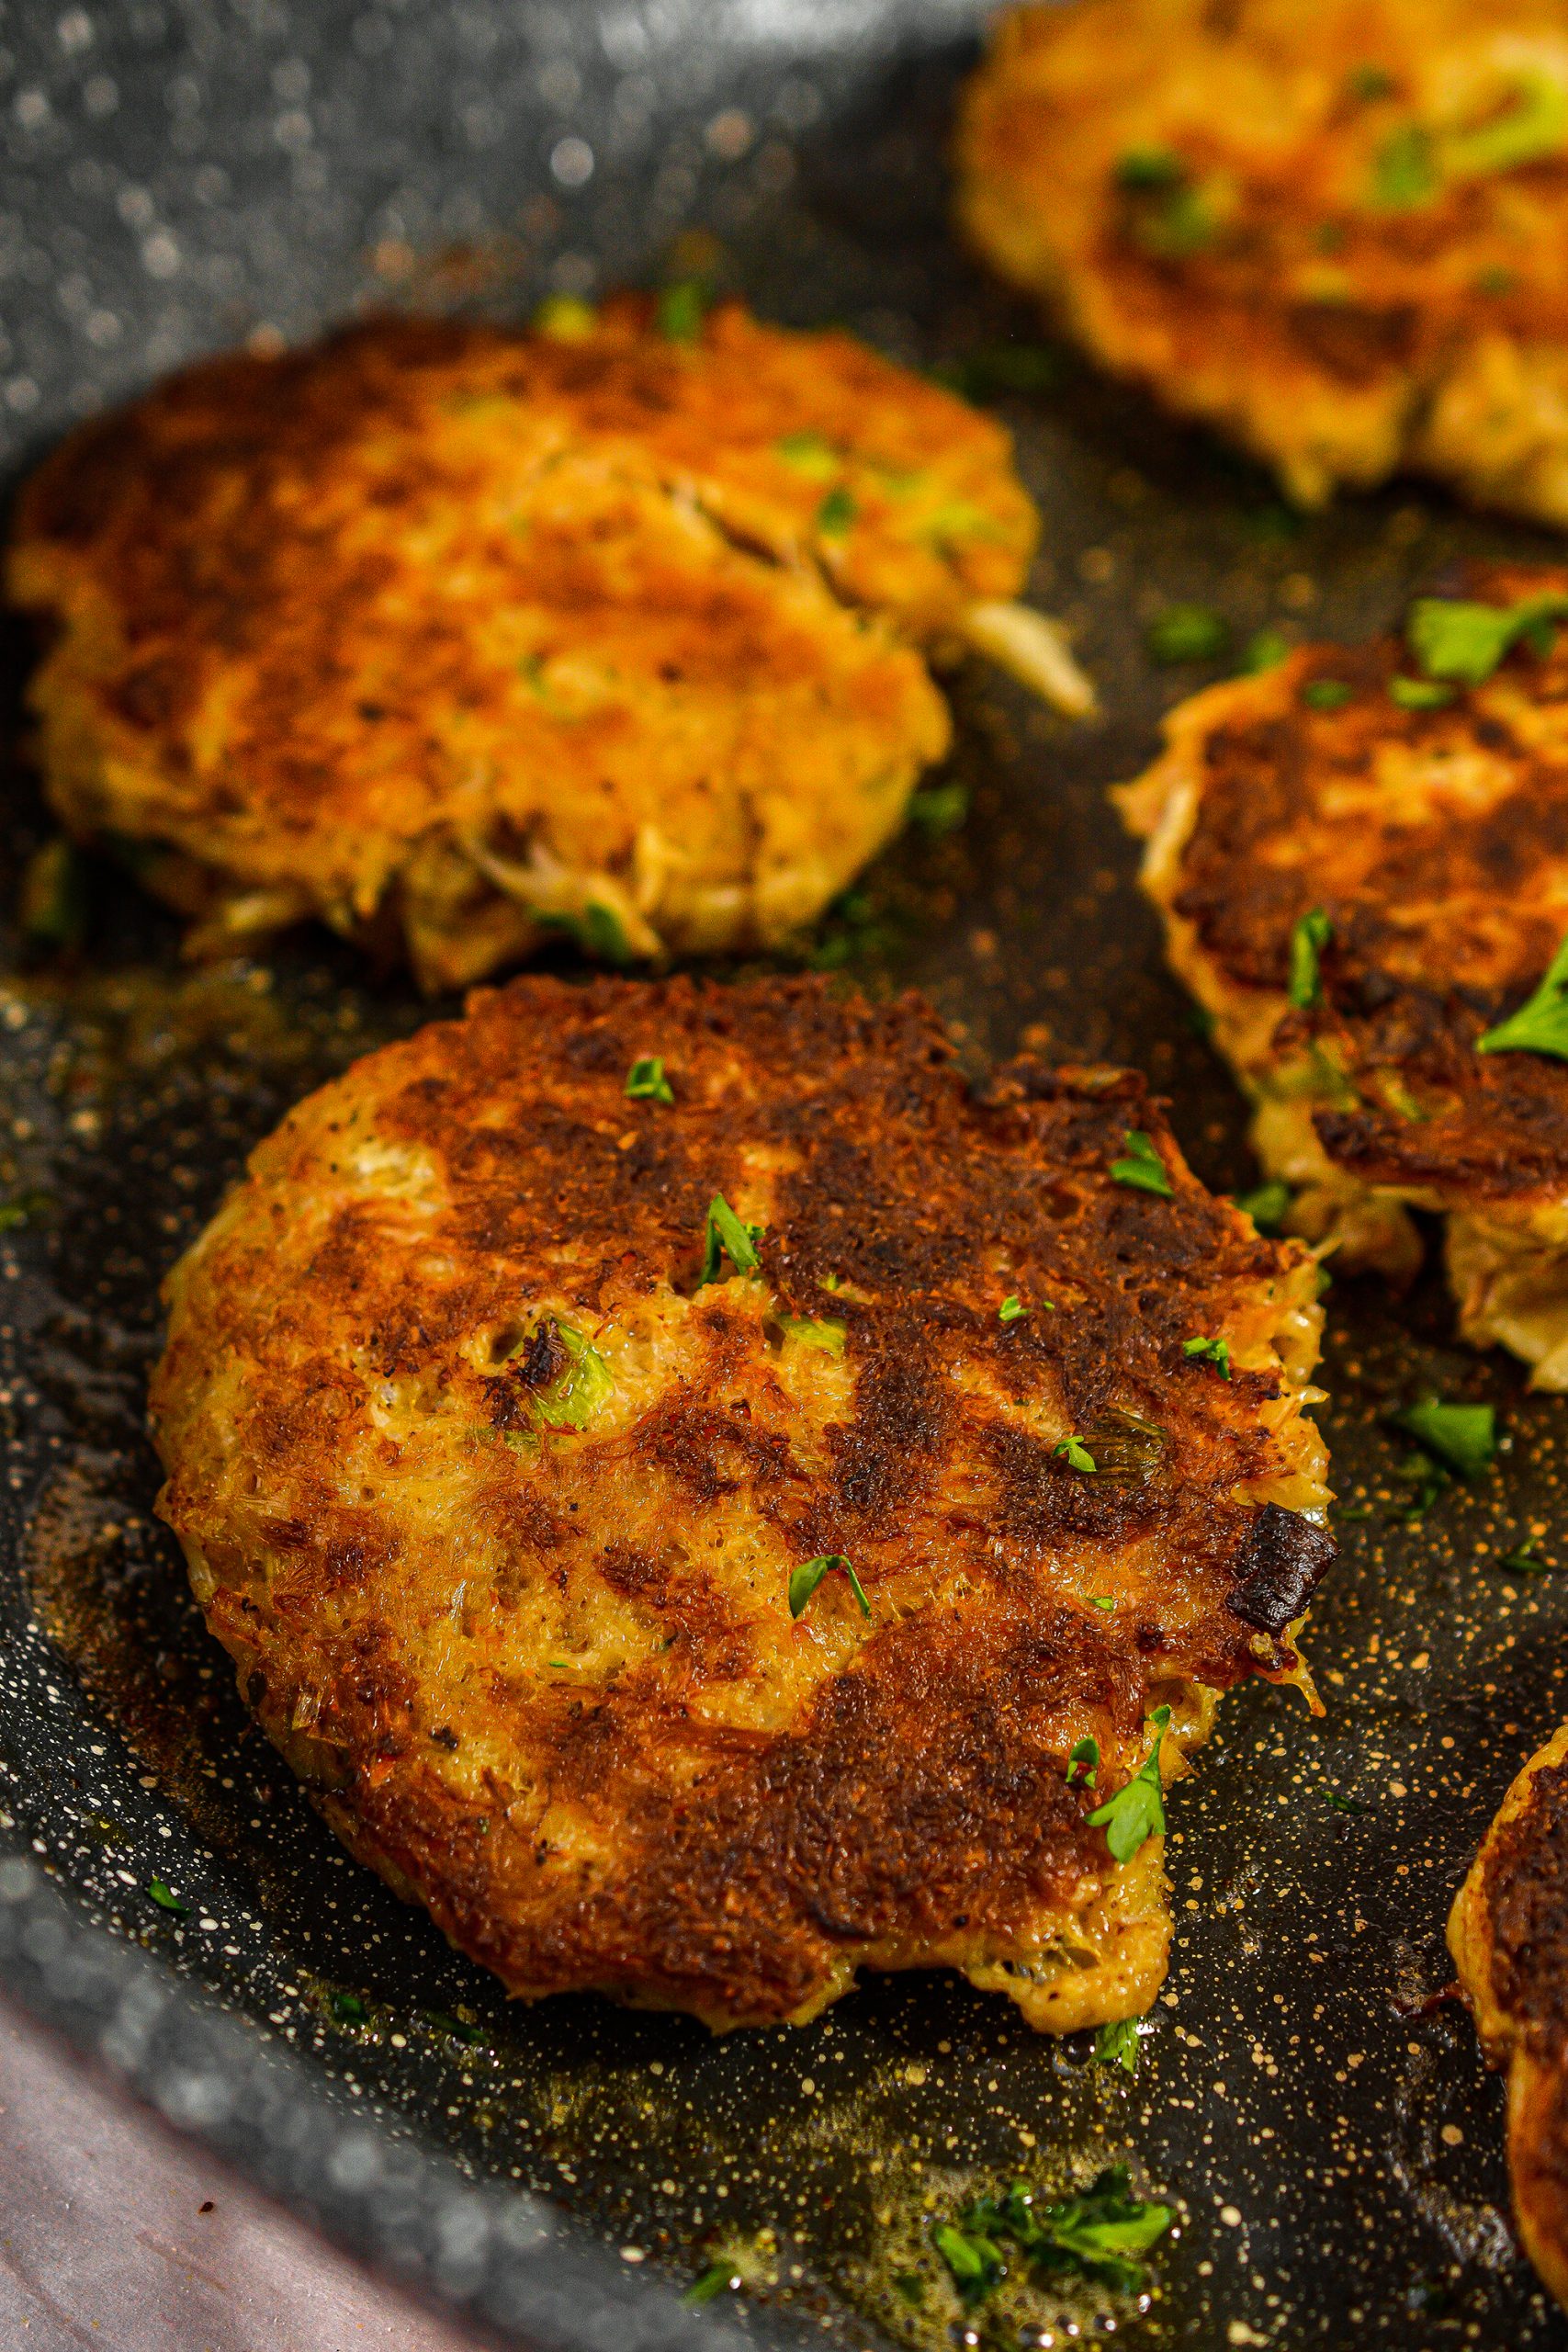 Form the crab mixture into 8 patties and fry evenly on both sides until browned and cooked through.